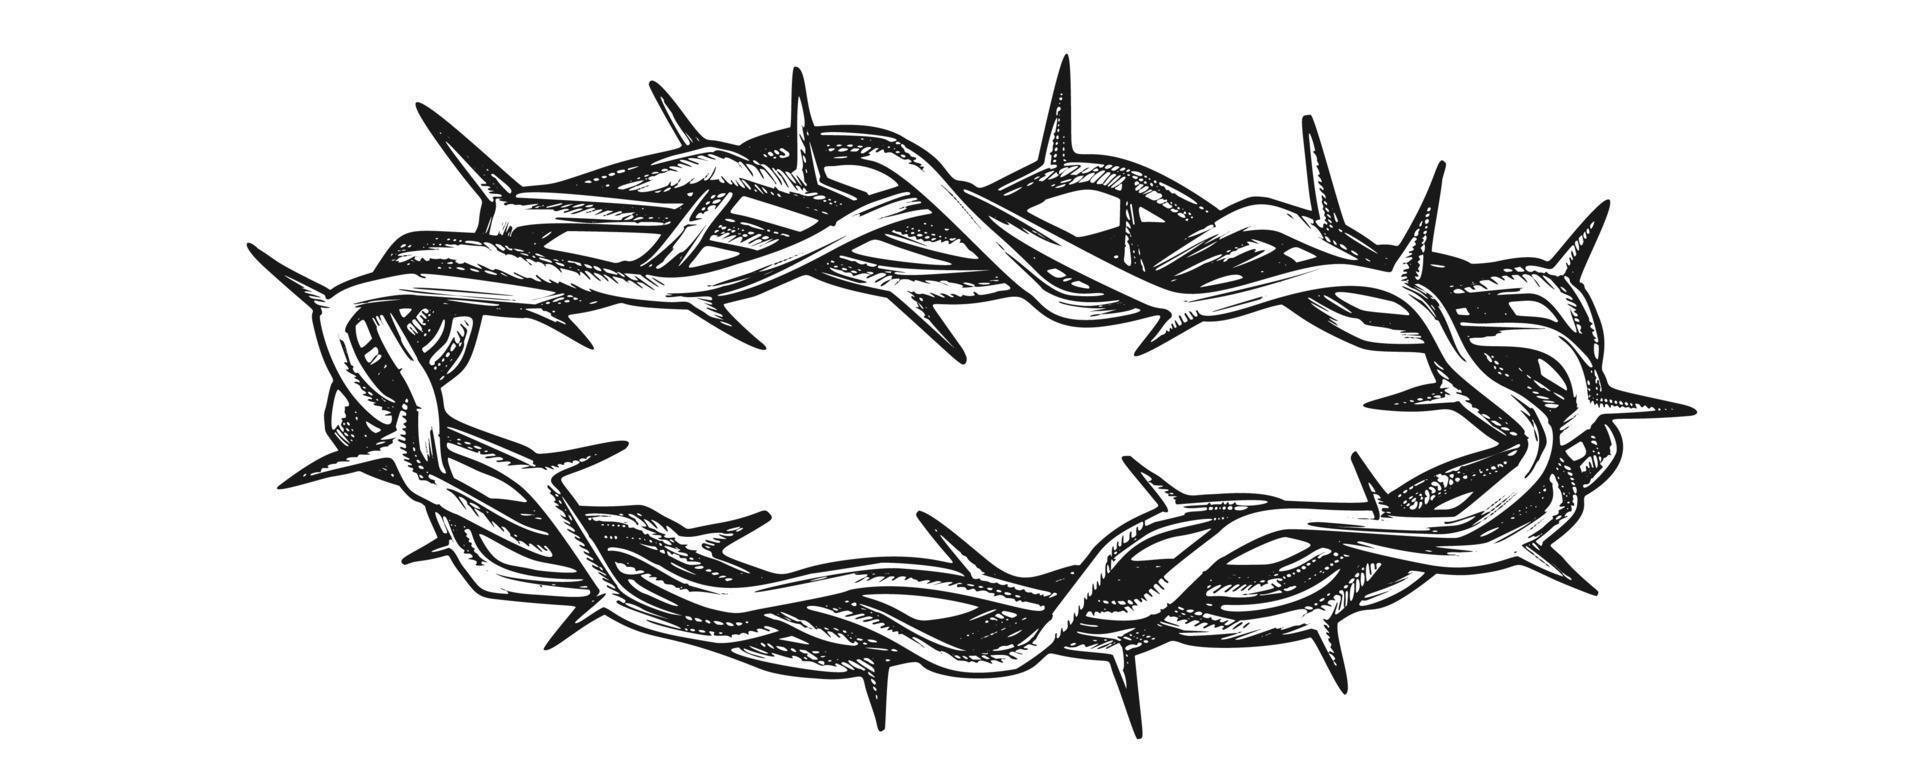 Crown Of Thorns Religious Symbol Vintage Vector